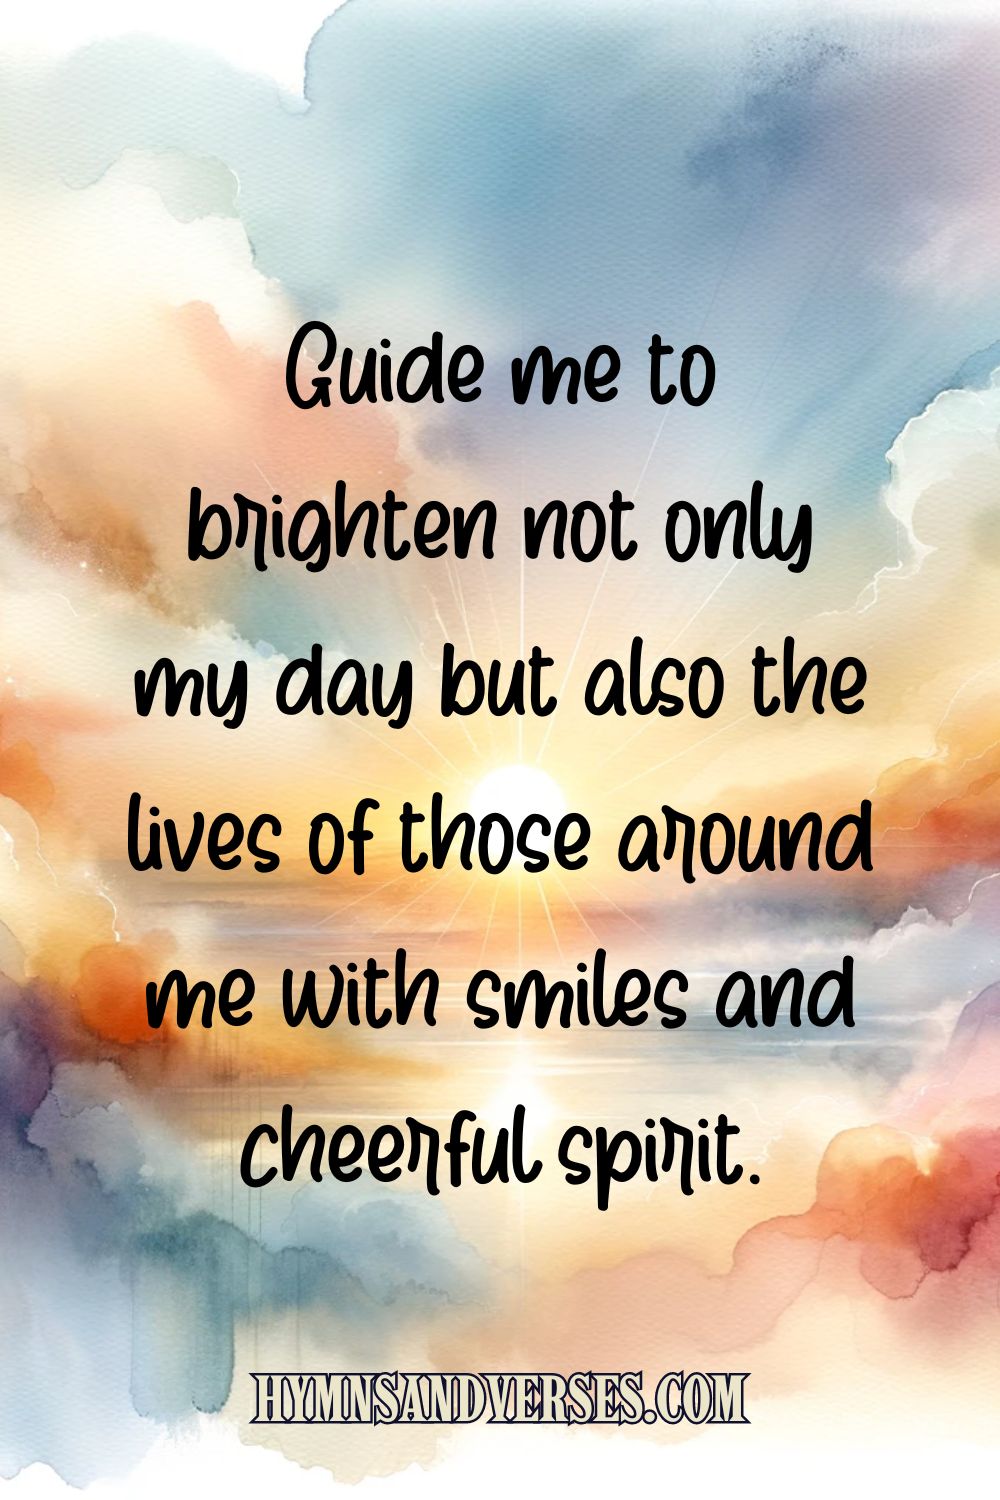 Quote image reads:  Guide me to brighten not only my day but also the lives of those around me with smiles and cheerful spirit.